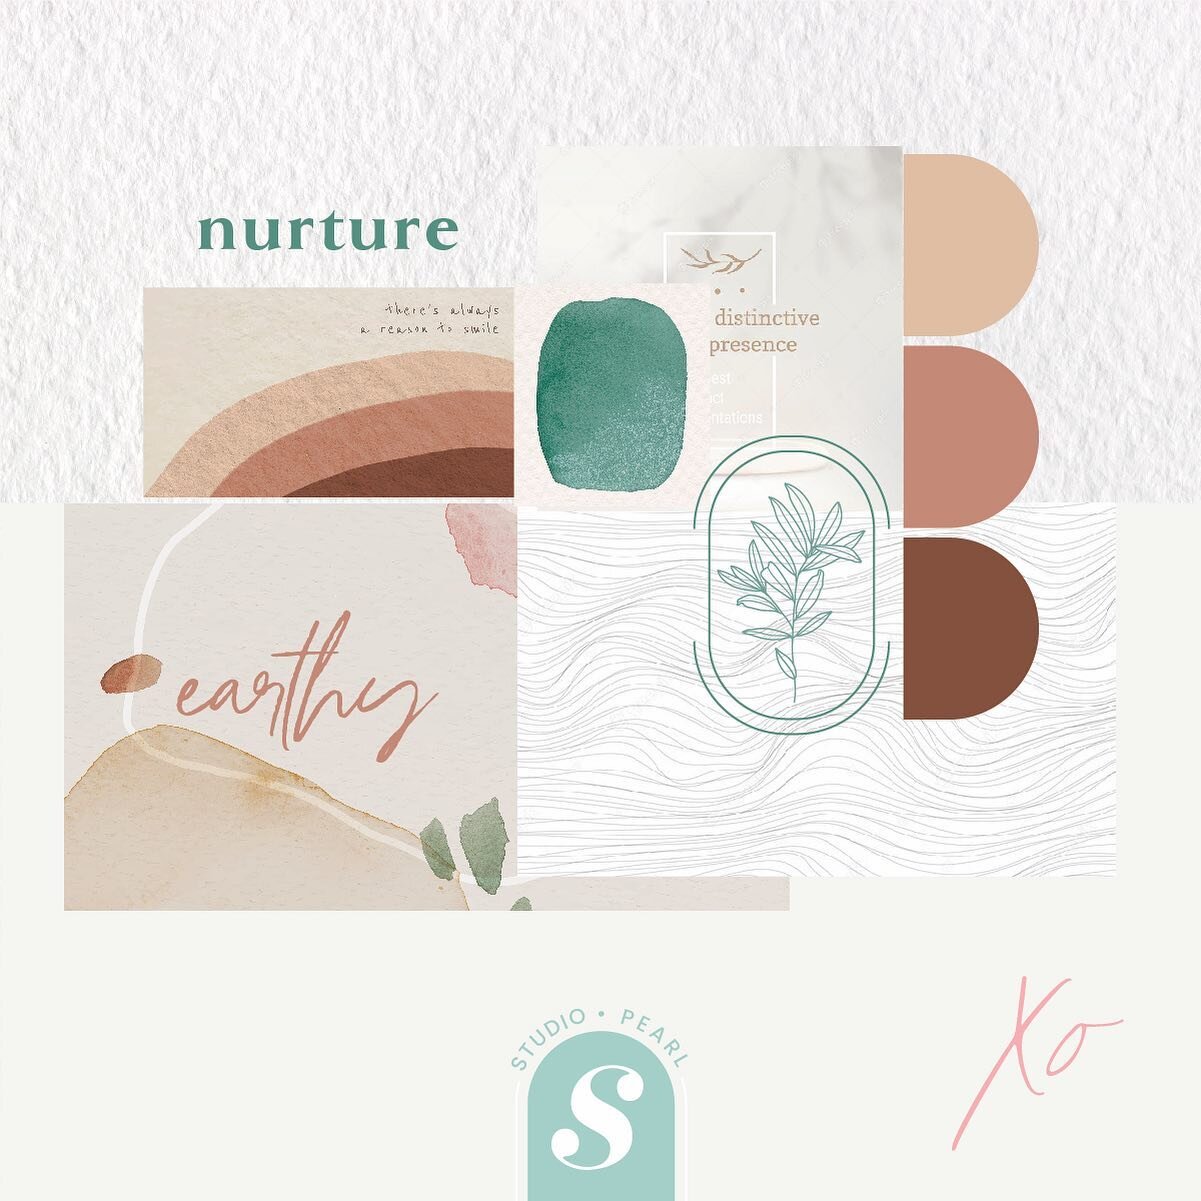 Earthy mood board for a moody day! I've always been so intrigued with how colours and images can affect your mood, and really give you an insight into a business. This brand is feeling very warm, kind, natural and understated luxury. I can almost ima